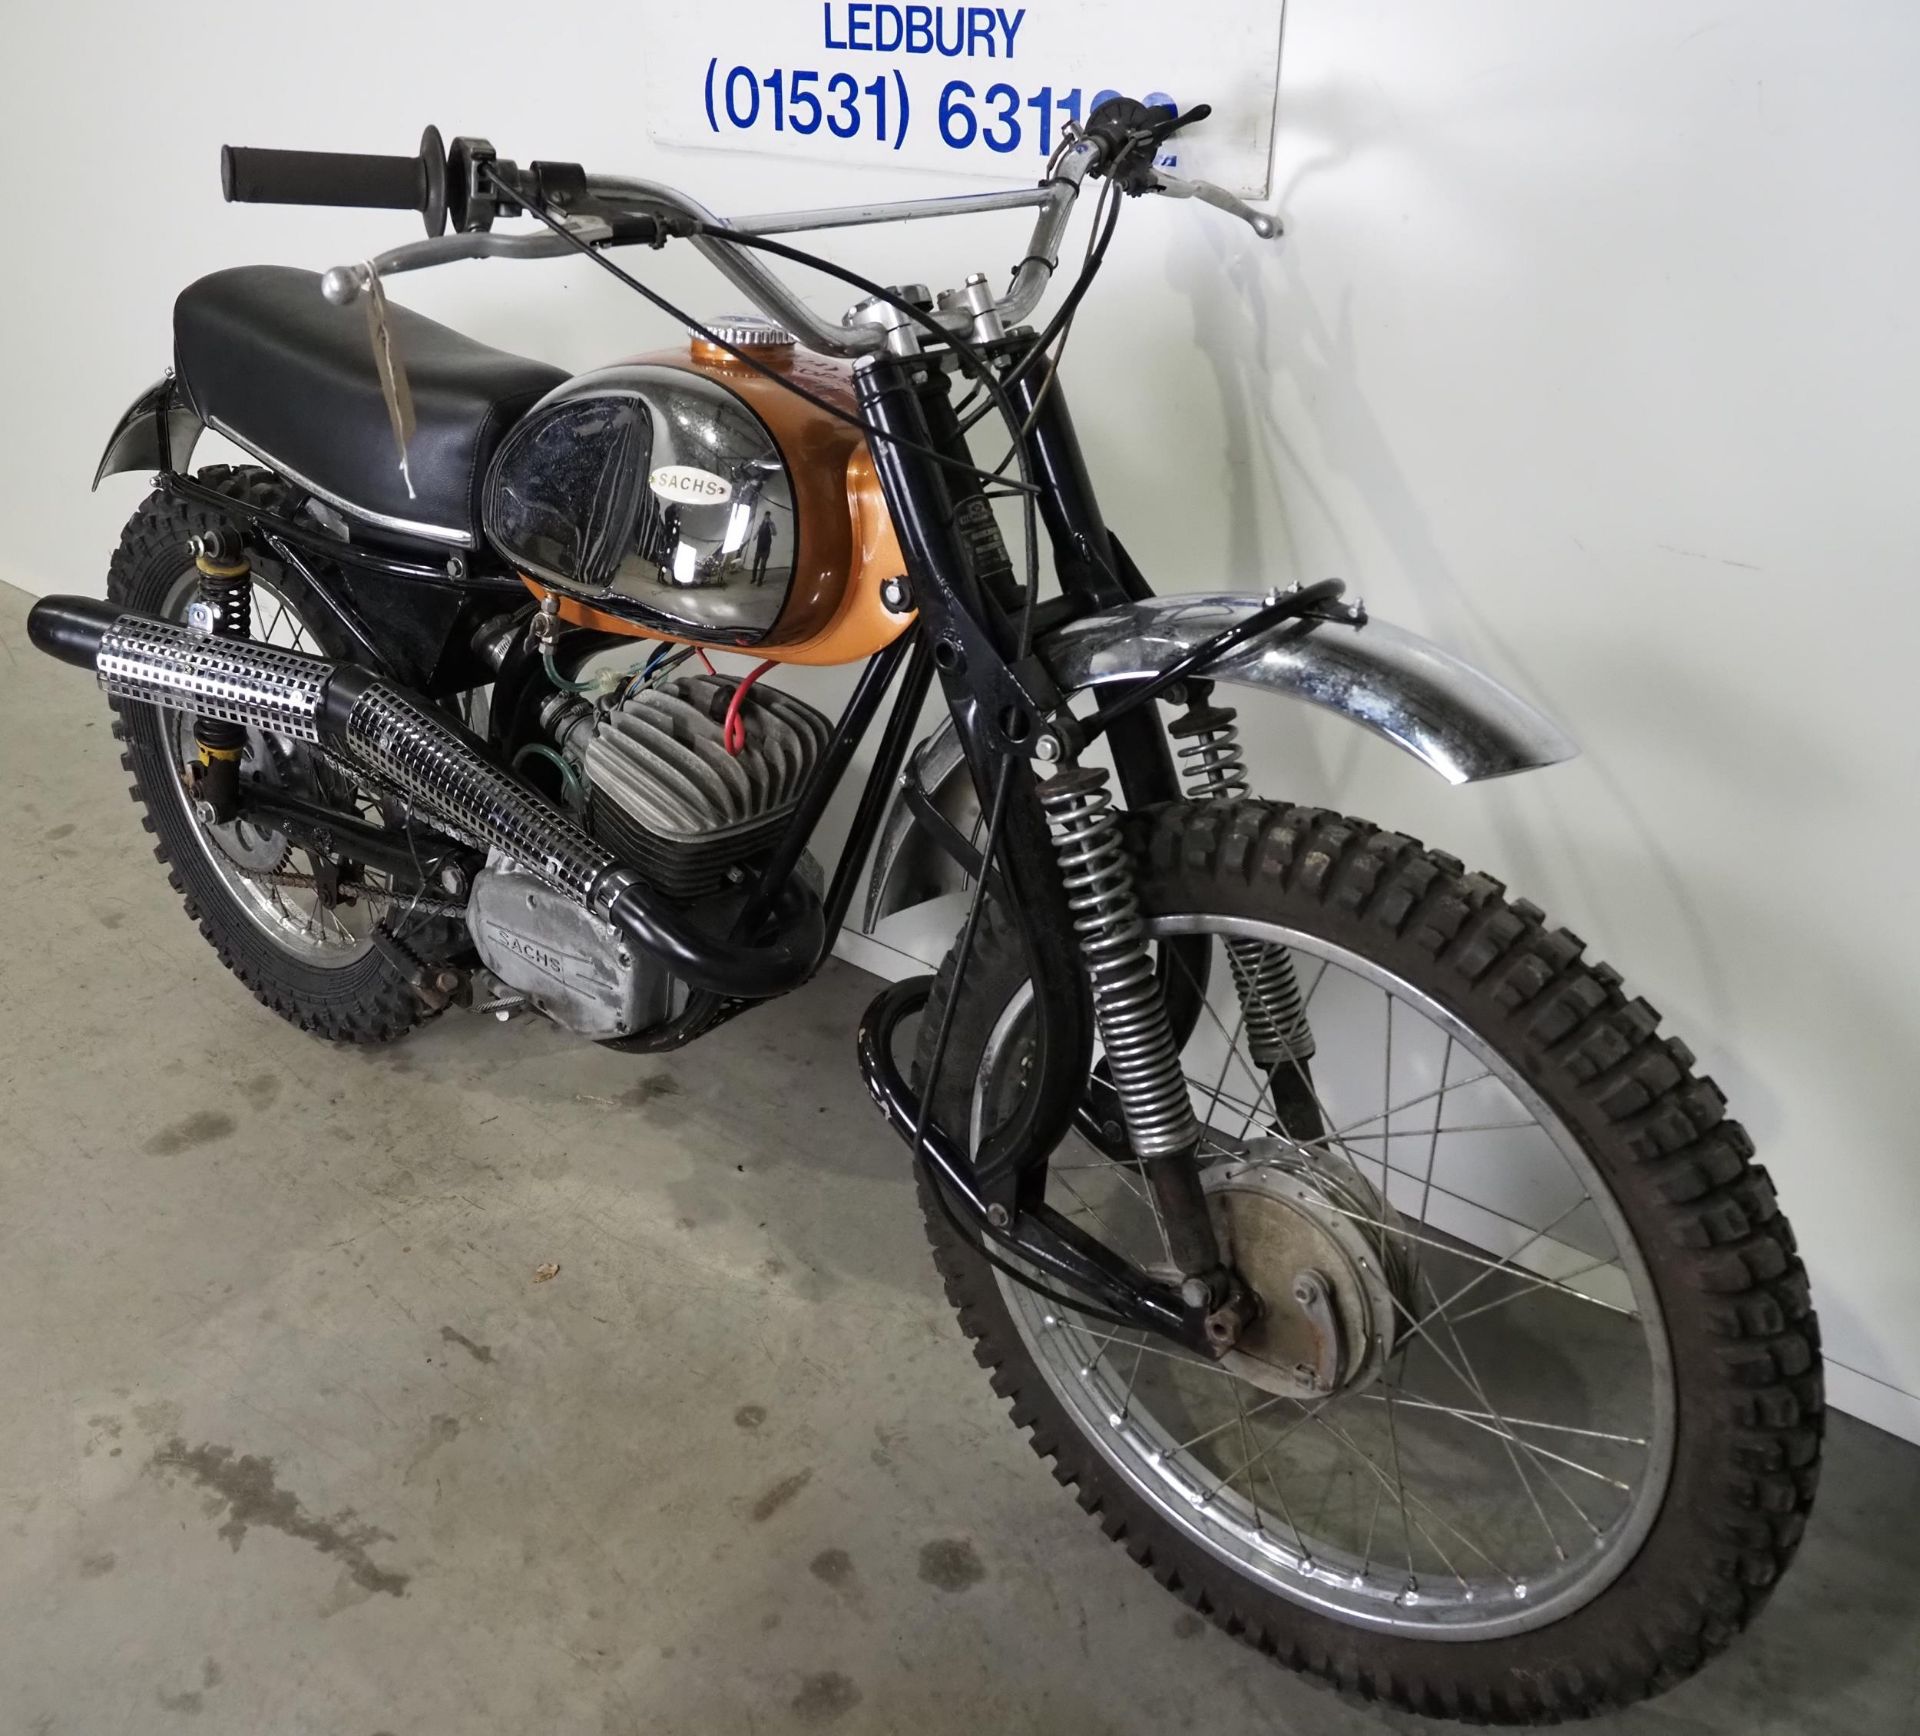 Sachs type 427 motocross bike. 1970. Frame No. 427-003950 Engine No. 57636666 Runs but requires - Image 4 of 7